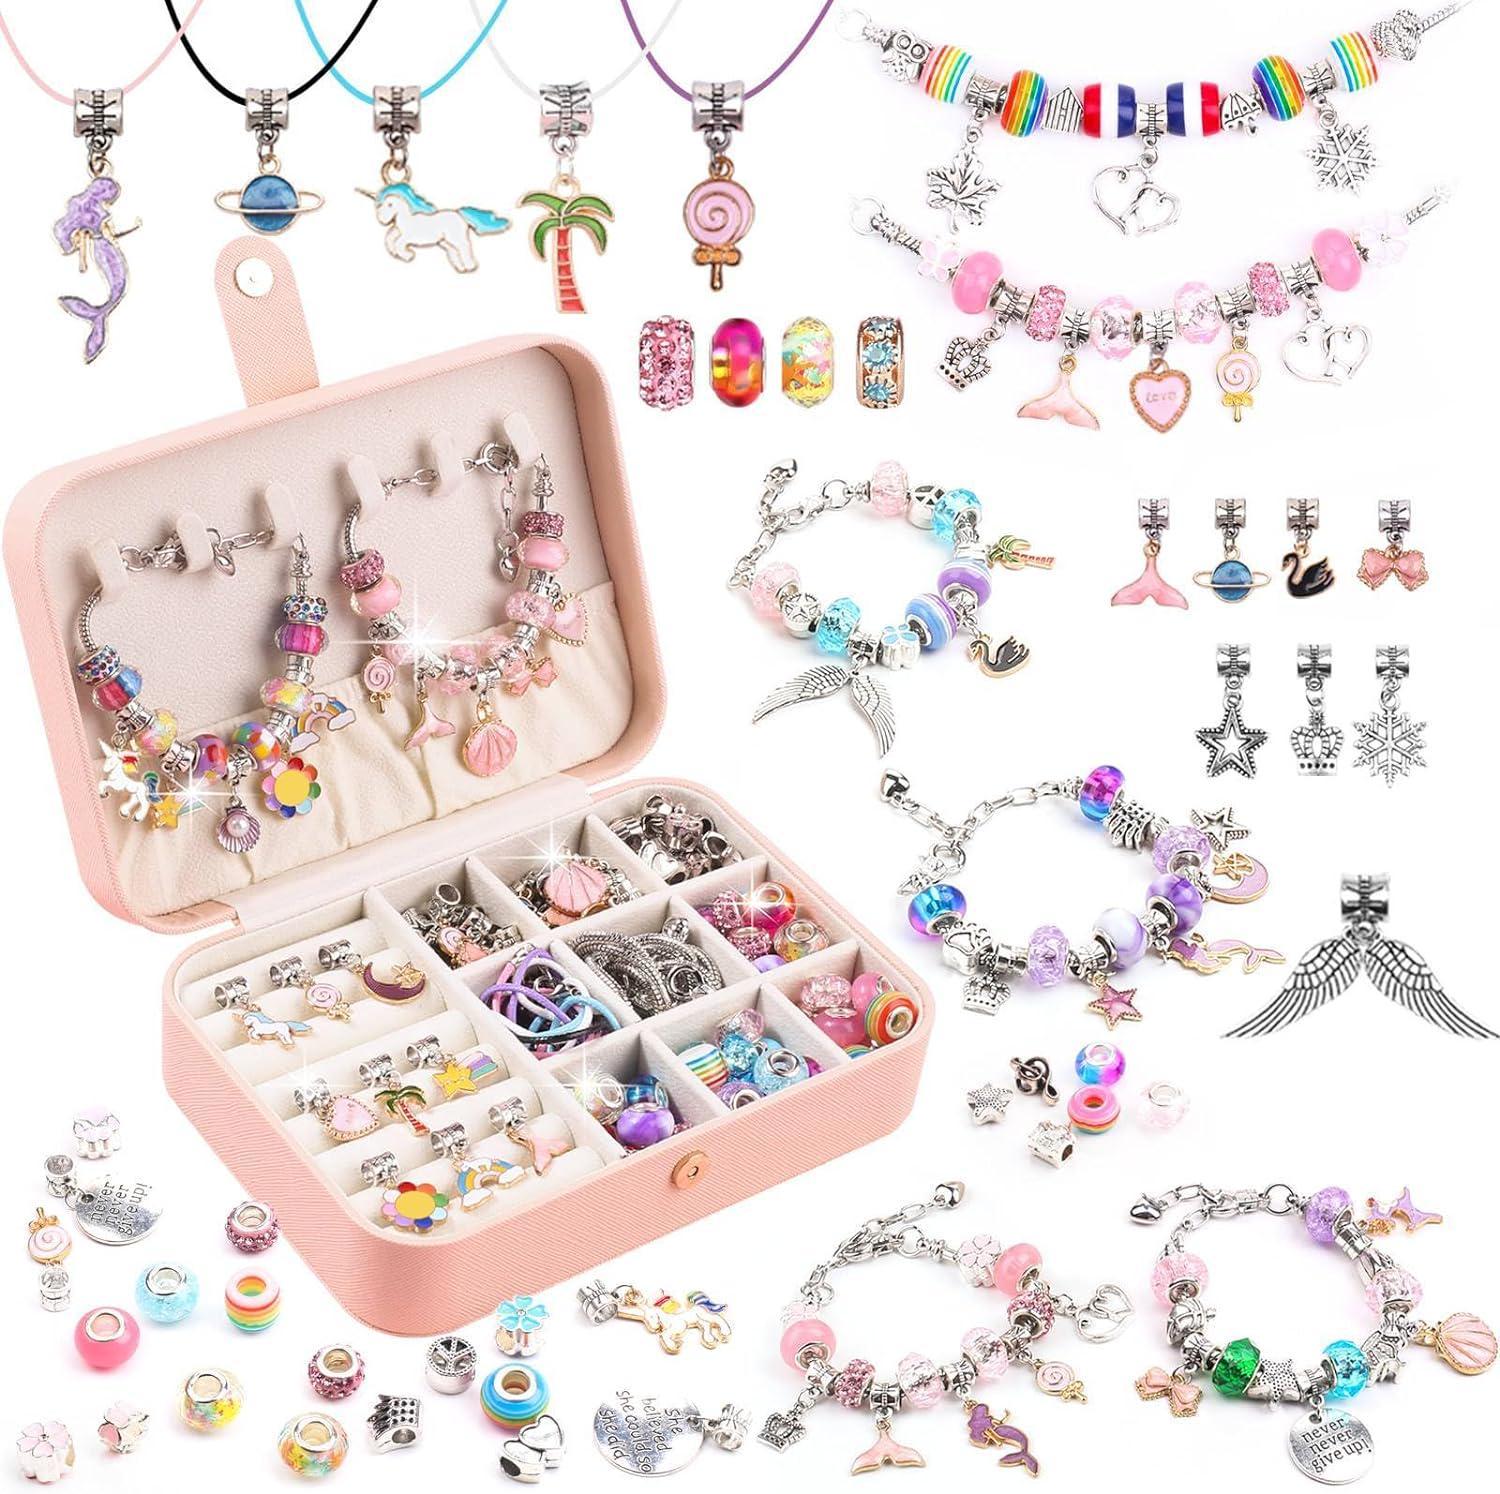 JOiFULi Make Your Own Clay Jewelry Beads Arts and Crafts Kit for Girls Gifts Ages 8 9 10 11 12 Teen Years Old and Up | 3 Bracelets and 3 Necklaces